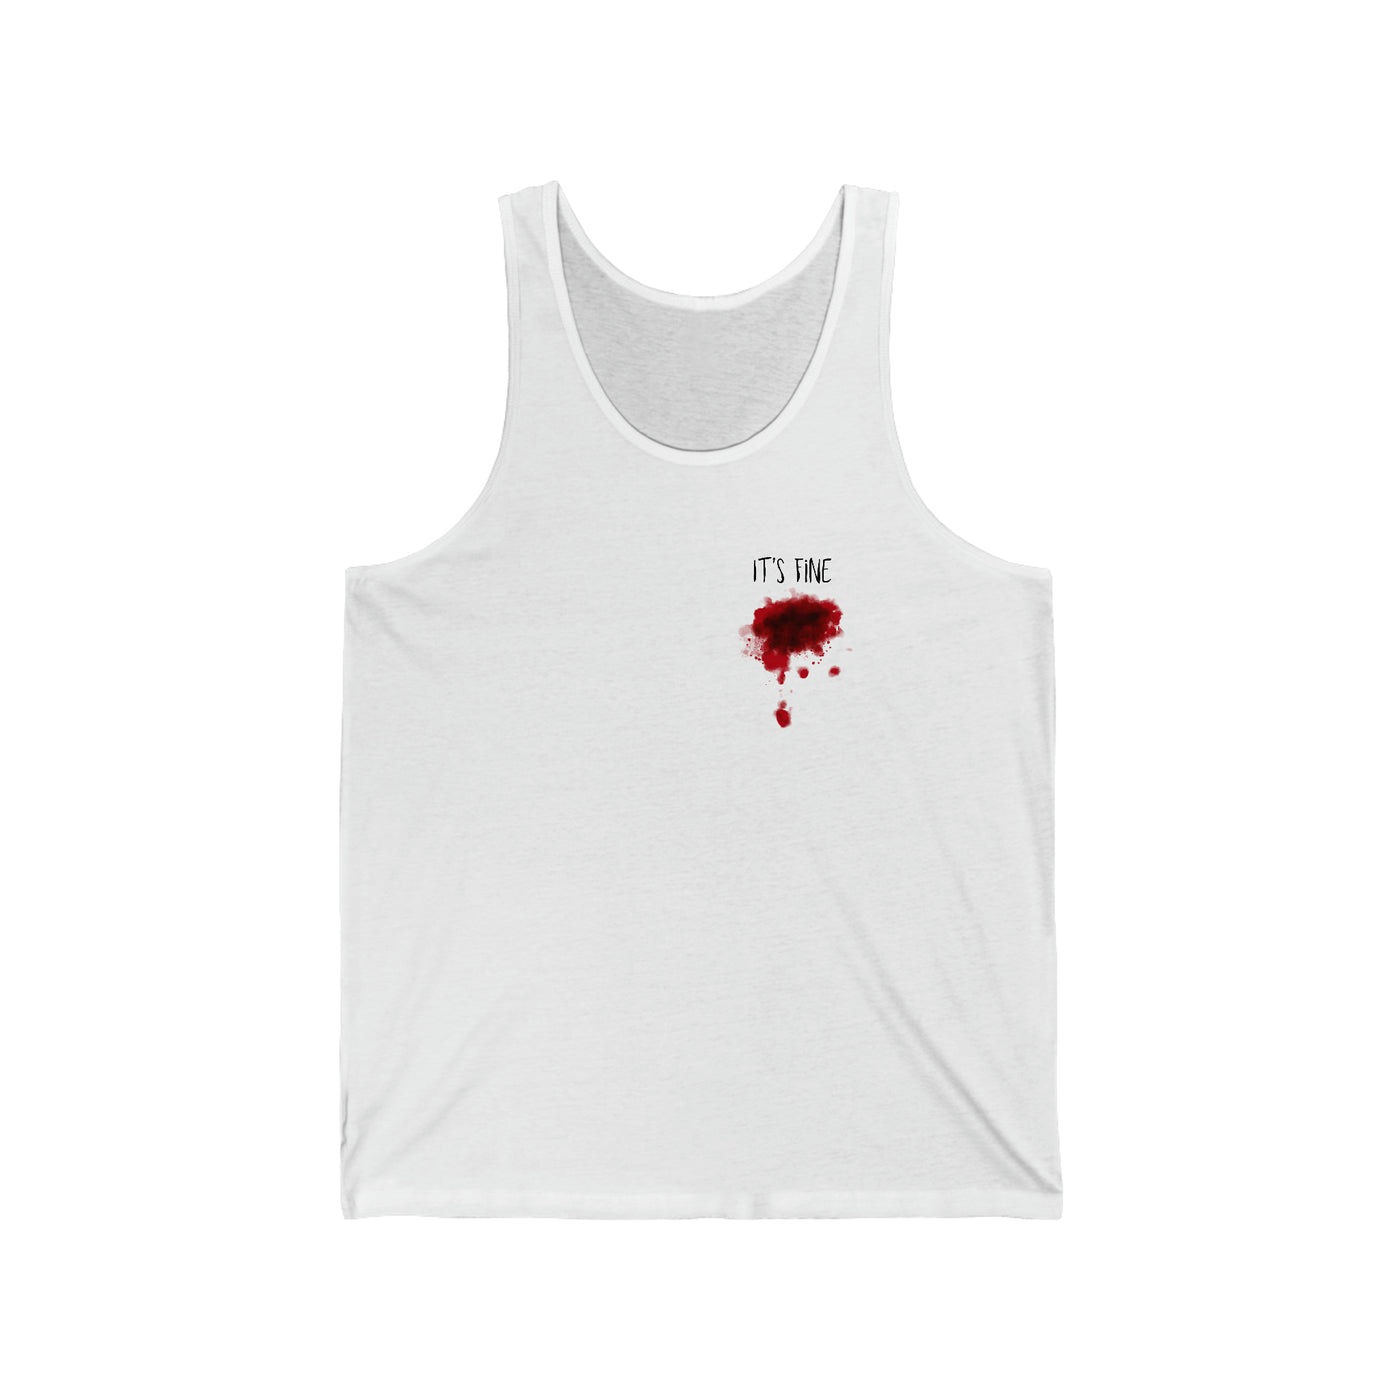 funny mens tank top for halloween with realistic gun shot wound